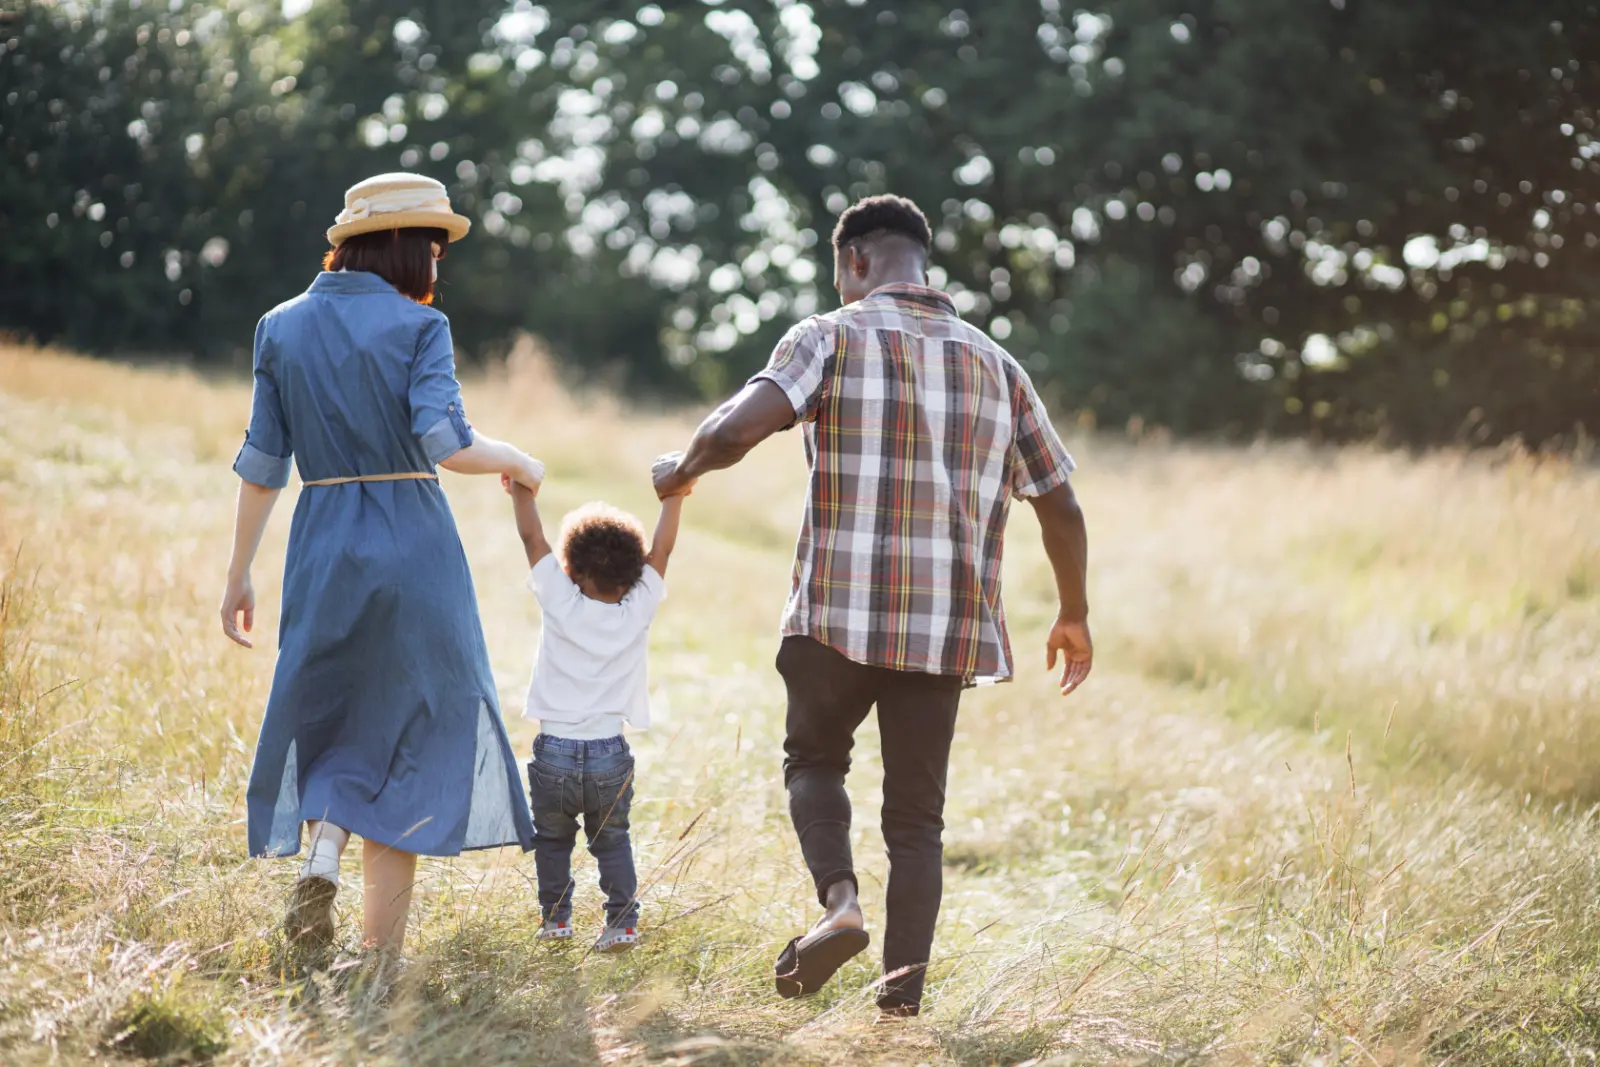 Parents walking with toddler outdoors - Trust us to enforce post-adoption contact agreements seamlessly. Expert guidance for a secure adoption journey. Your peace of mind matters.